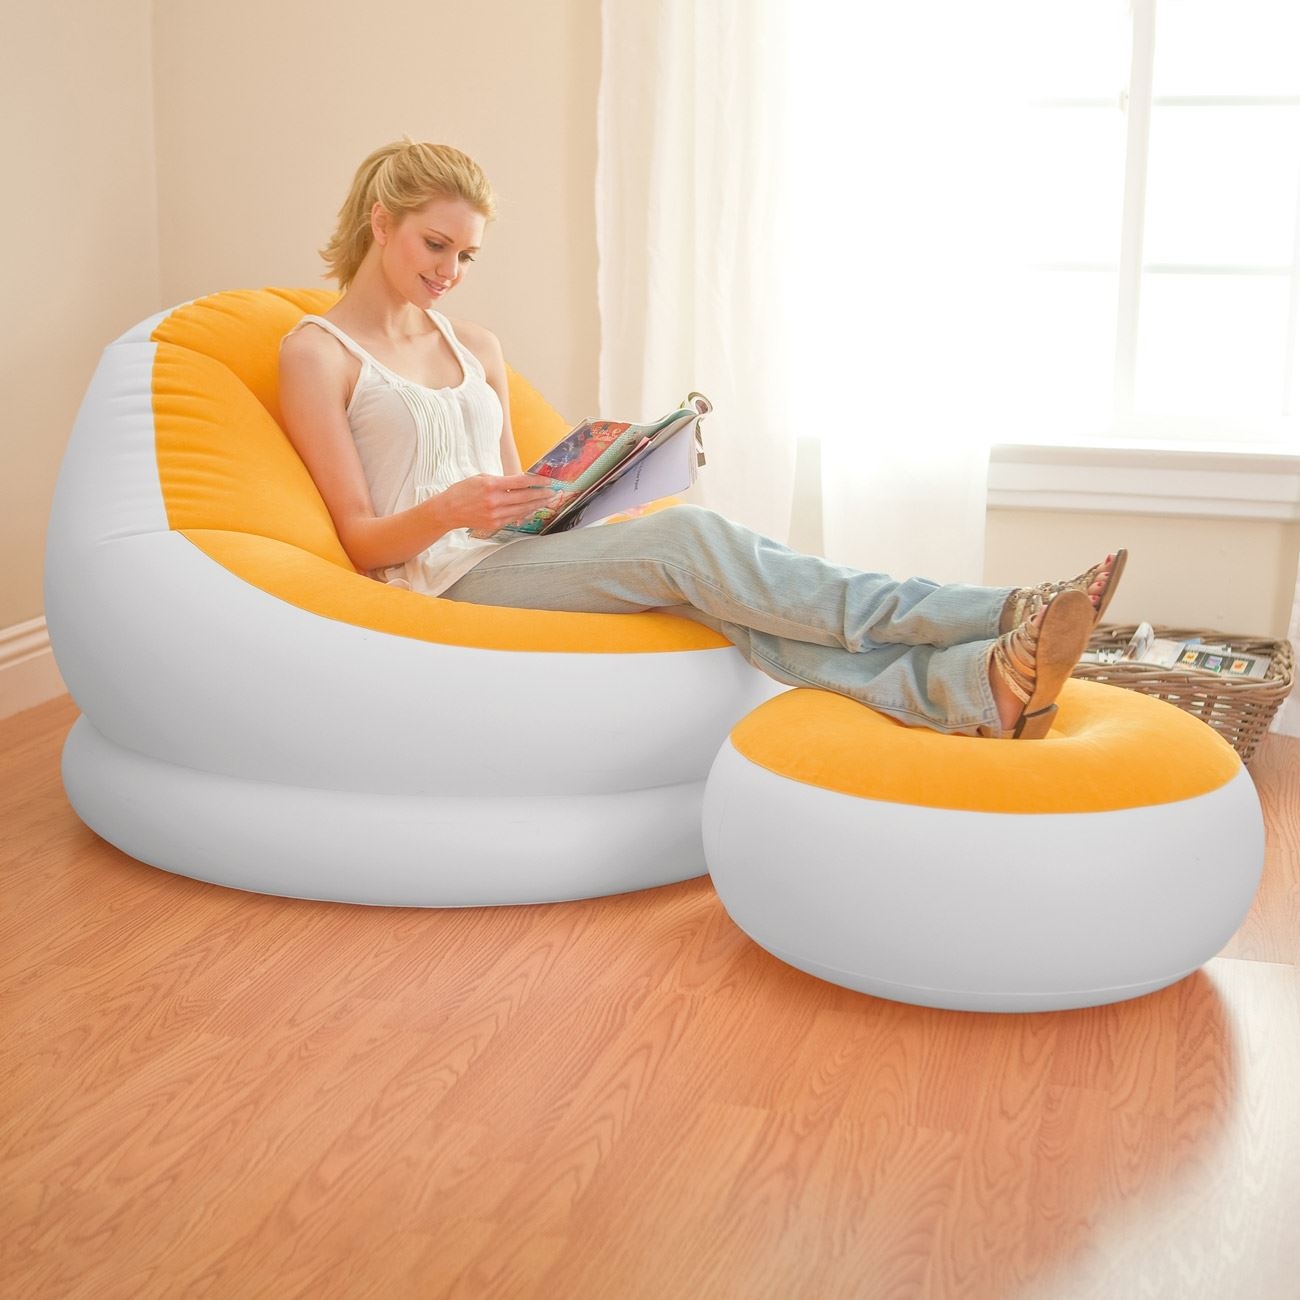 Intex Inflatable Colorful Cafe Chaise Lounge Chair w/ Ottoman (Orange)